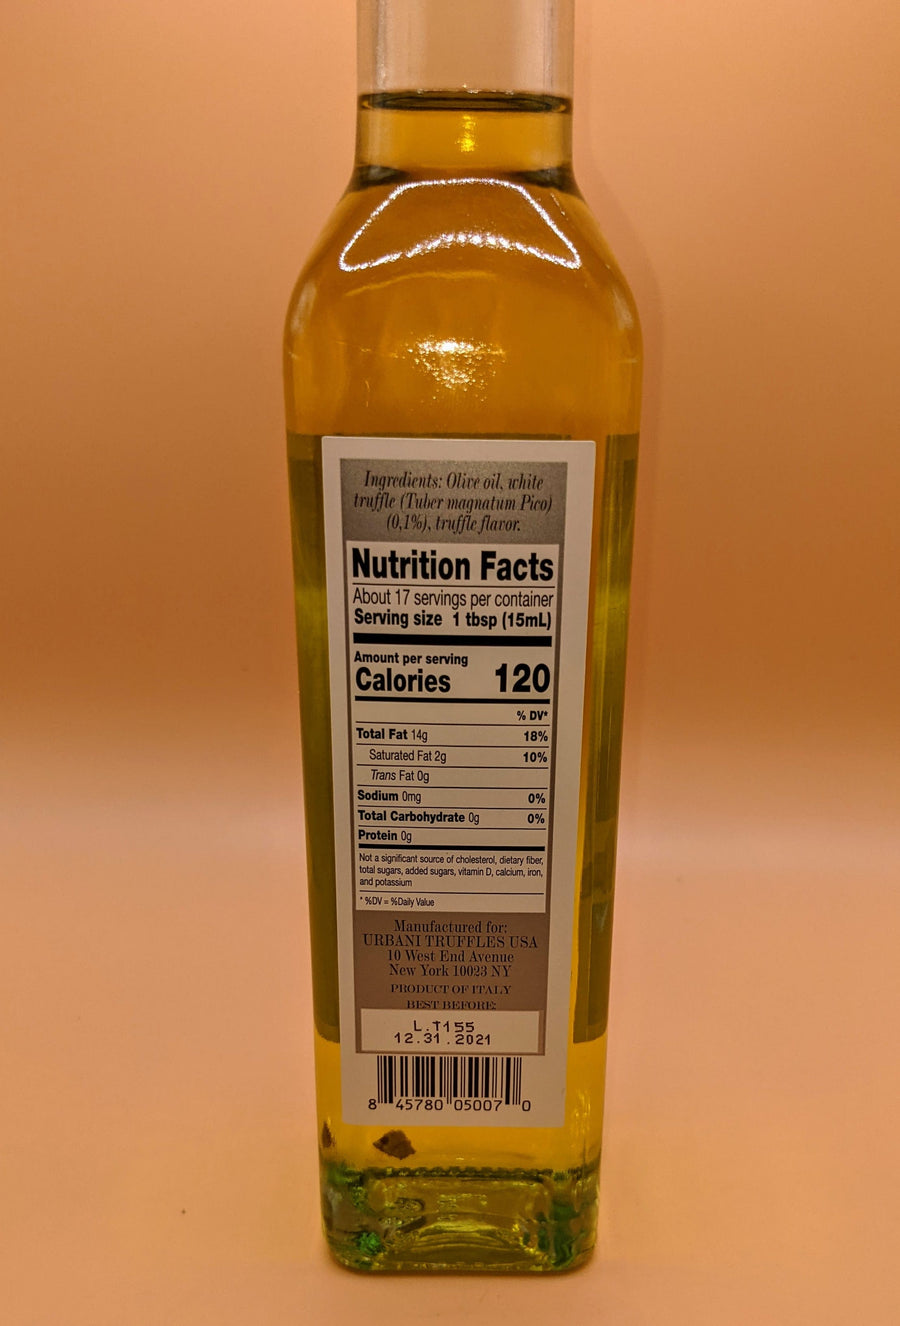 Bottle-of-Bianco-Olive-Oil-White-truffle-8.4-oz-real-gourmet-food-foodie-nutrition-facts